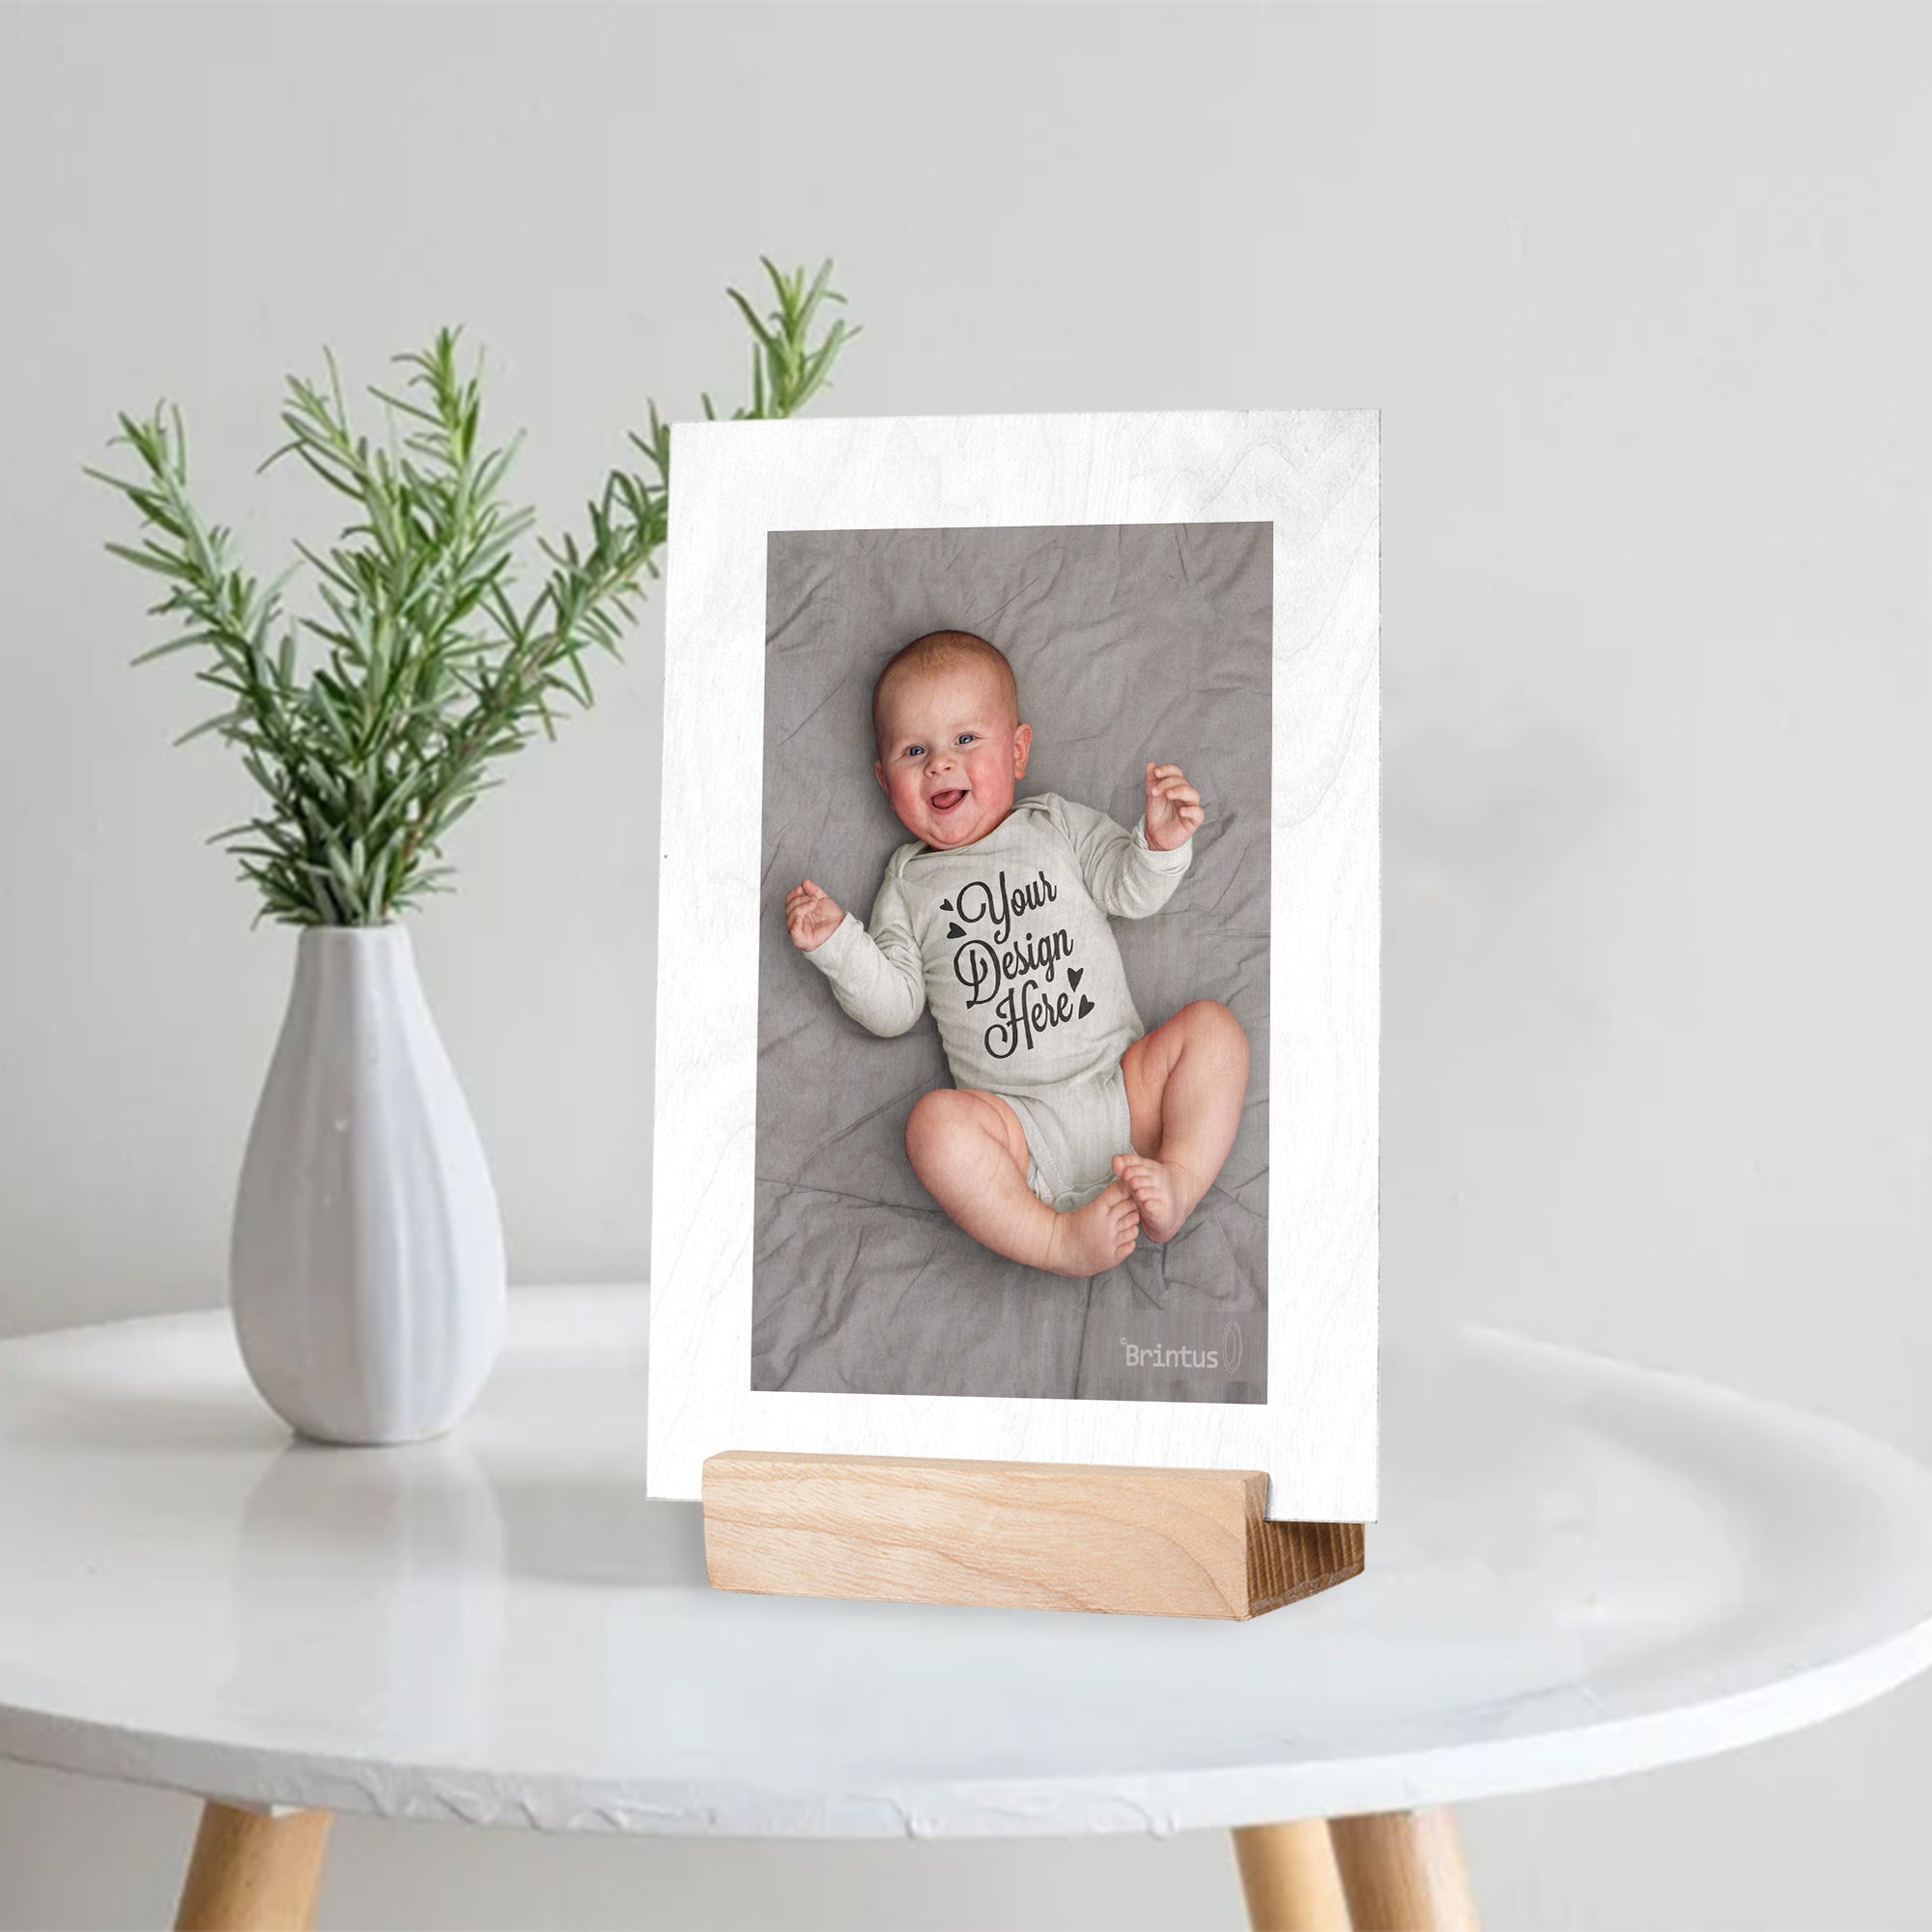 Personalized Your Photo Wood Photo Print Stand